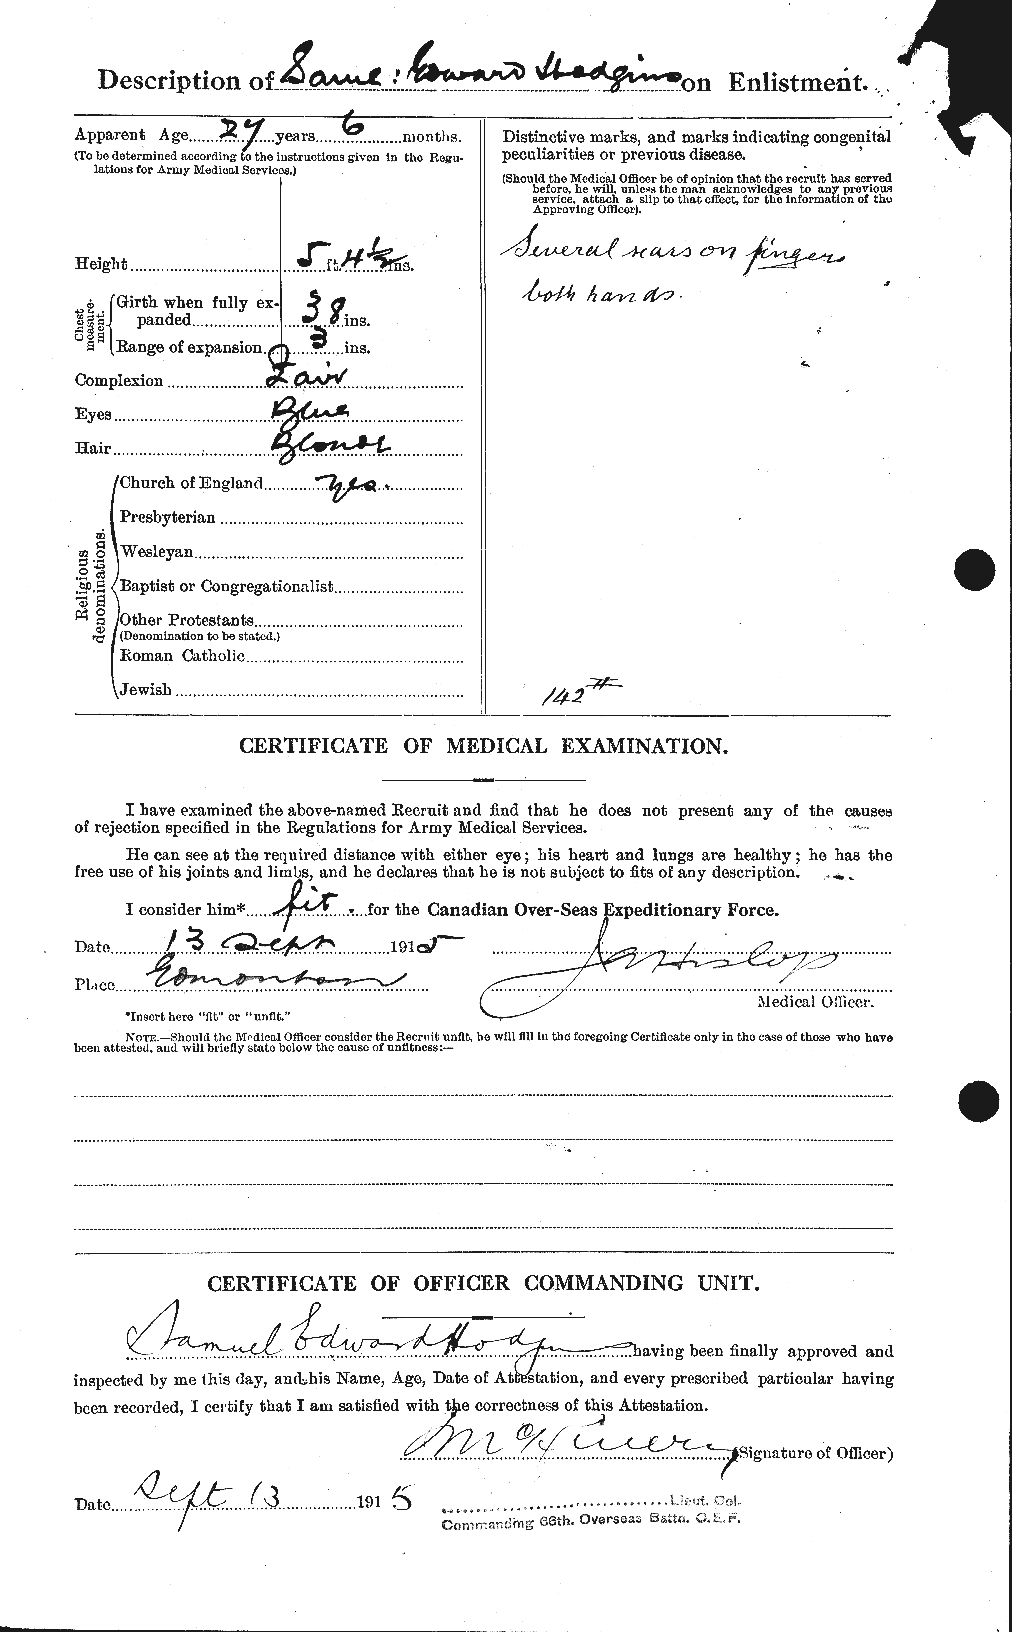 Personnel Records of the First World War - CEF 395260b